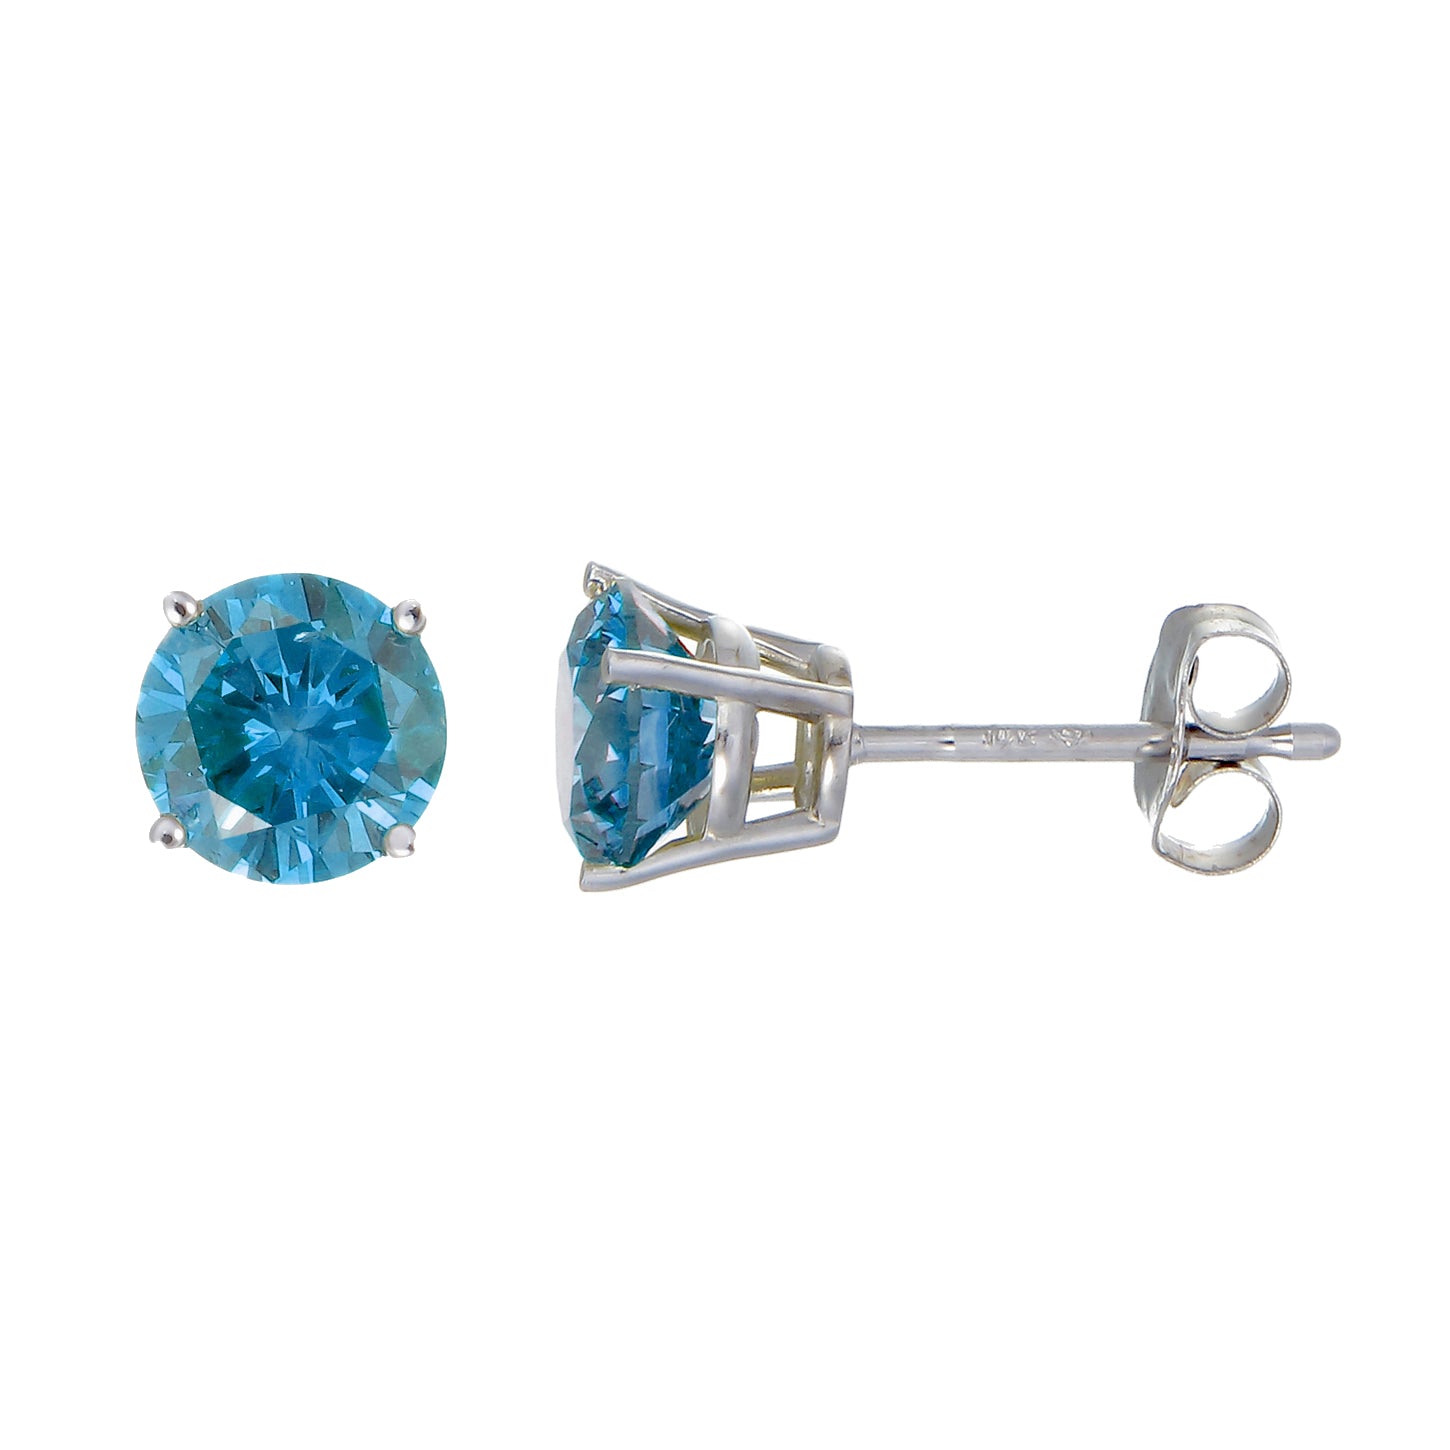 1/4 to 2 cttw Blue Diamond Stud Earrings 14k White or Yellow Gold Round with Push Backs